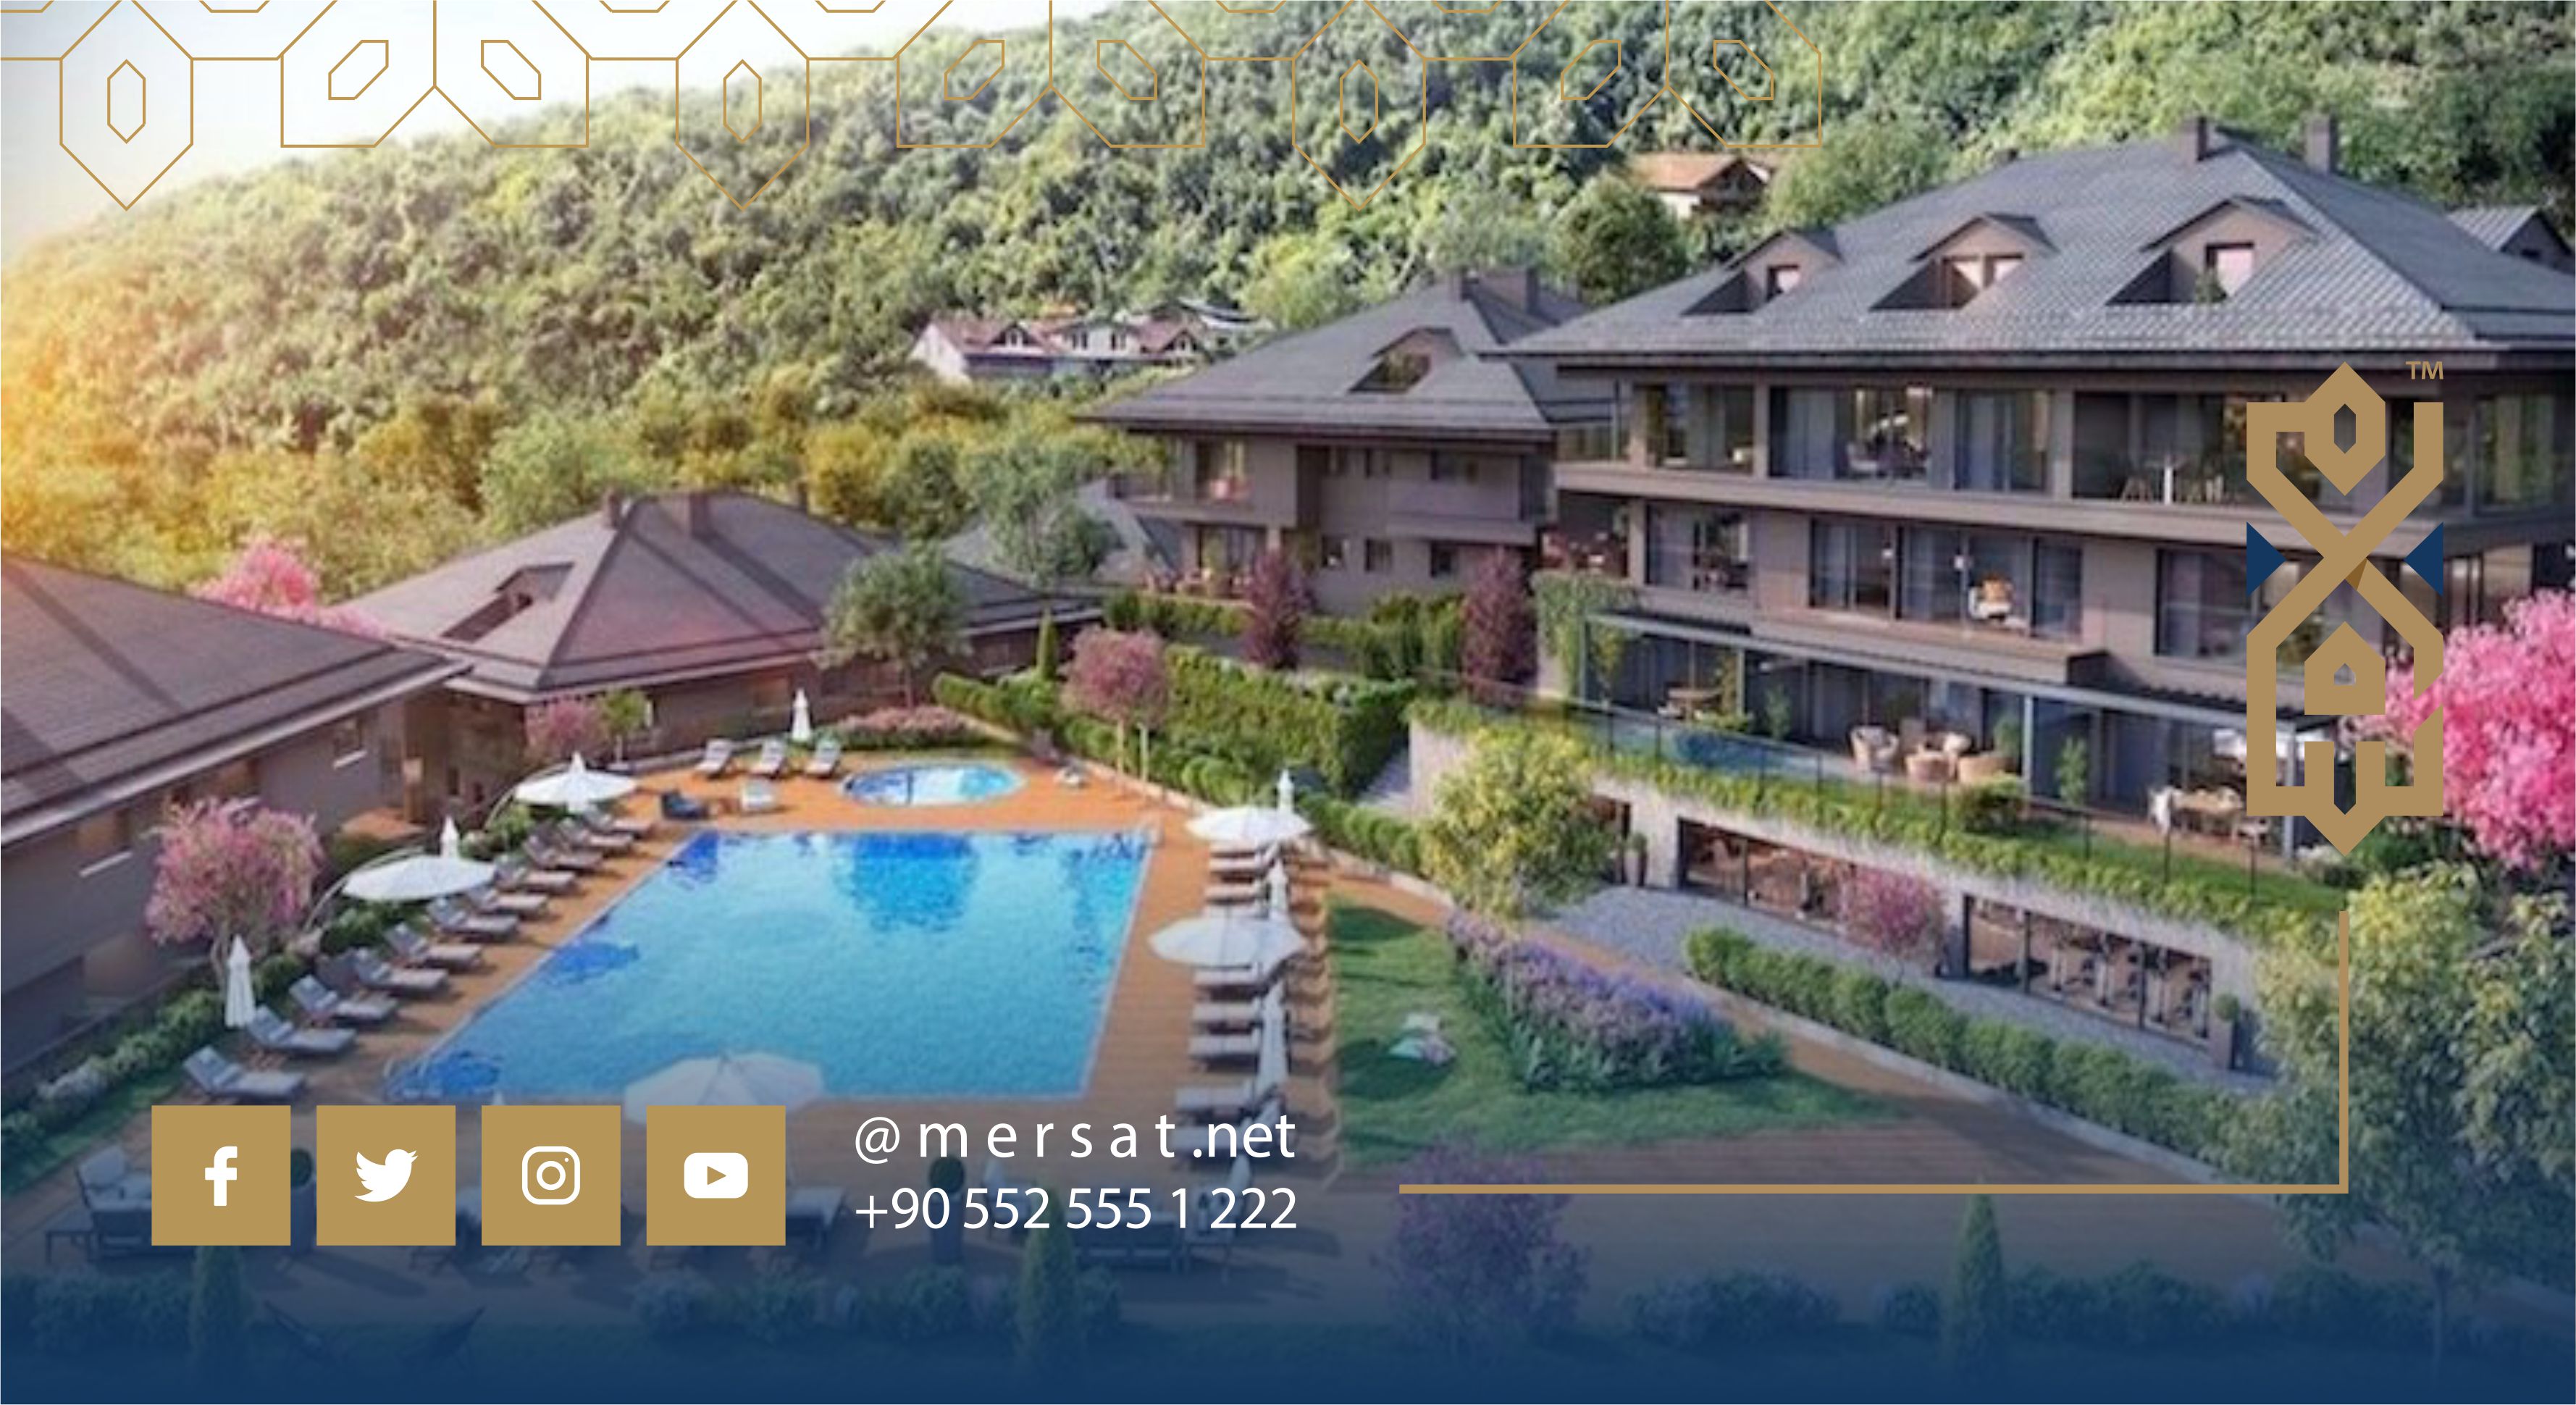 Sariyer is the power of real estate investment in Istanbul